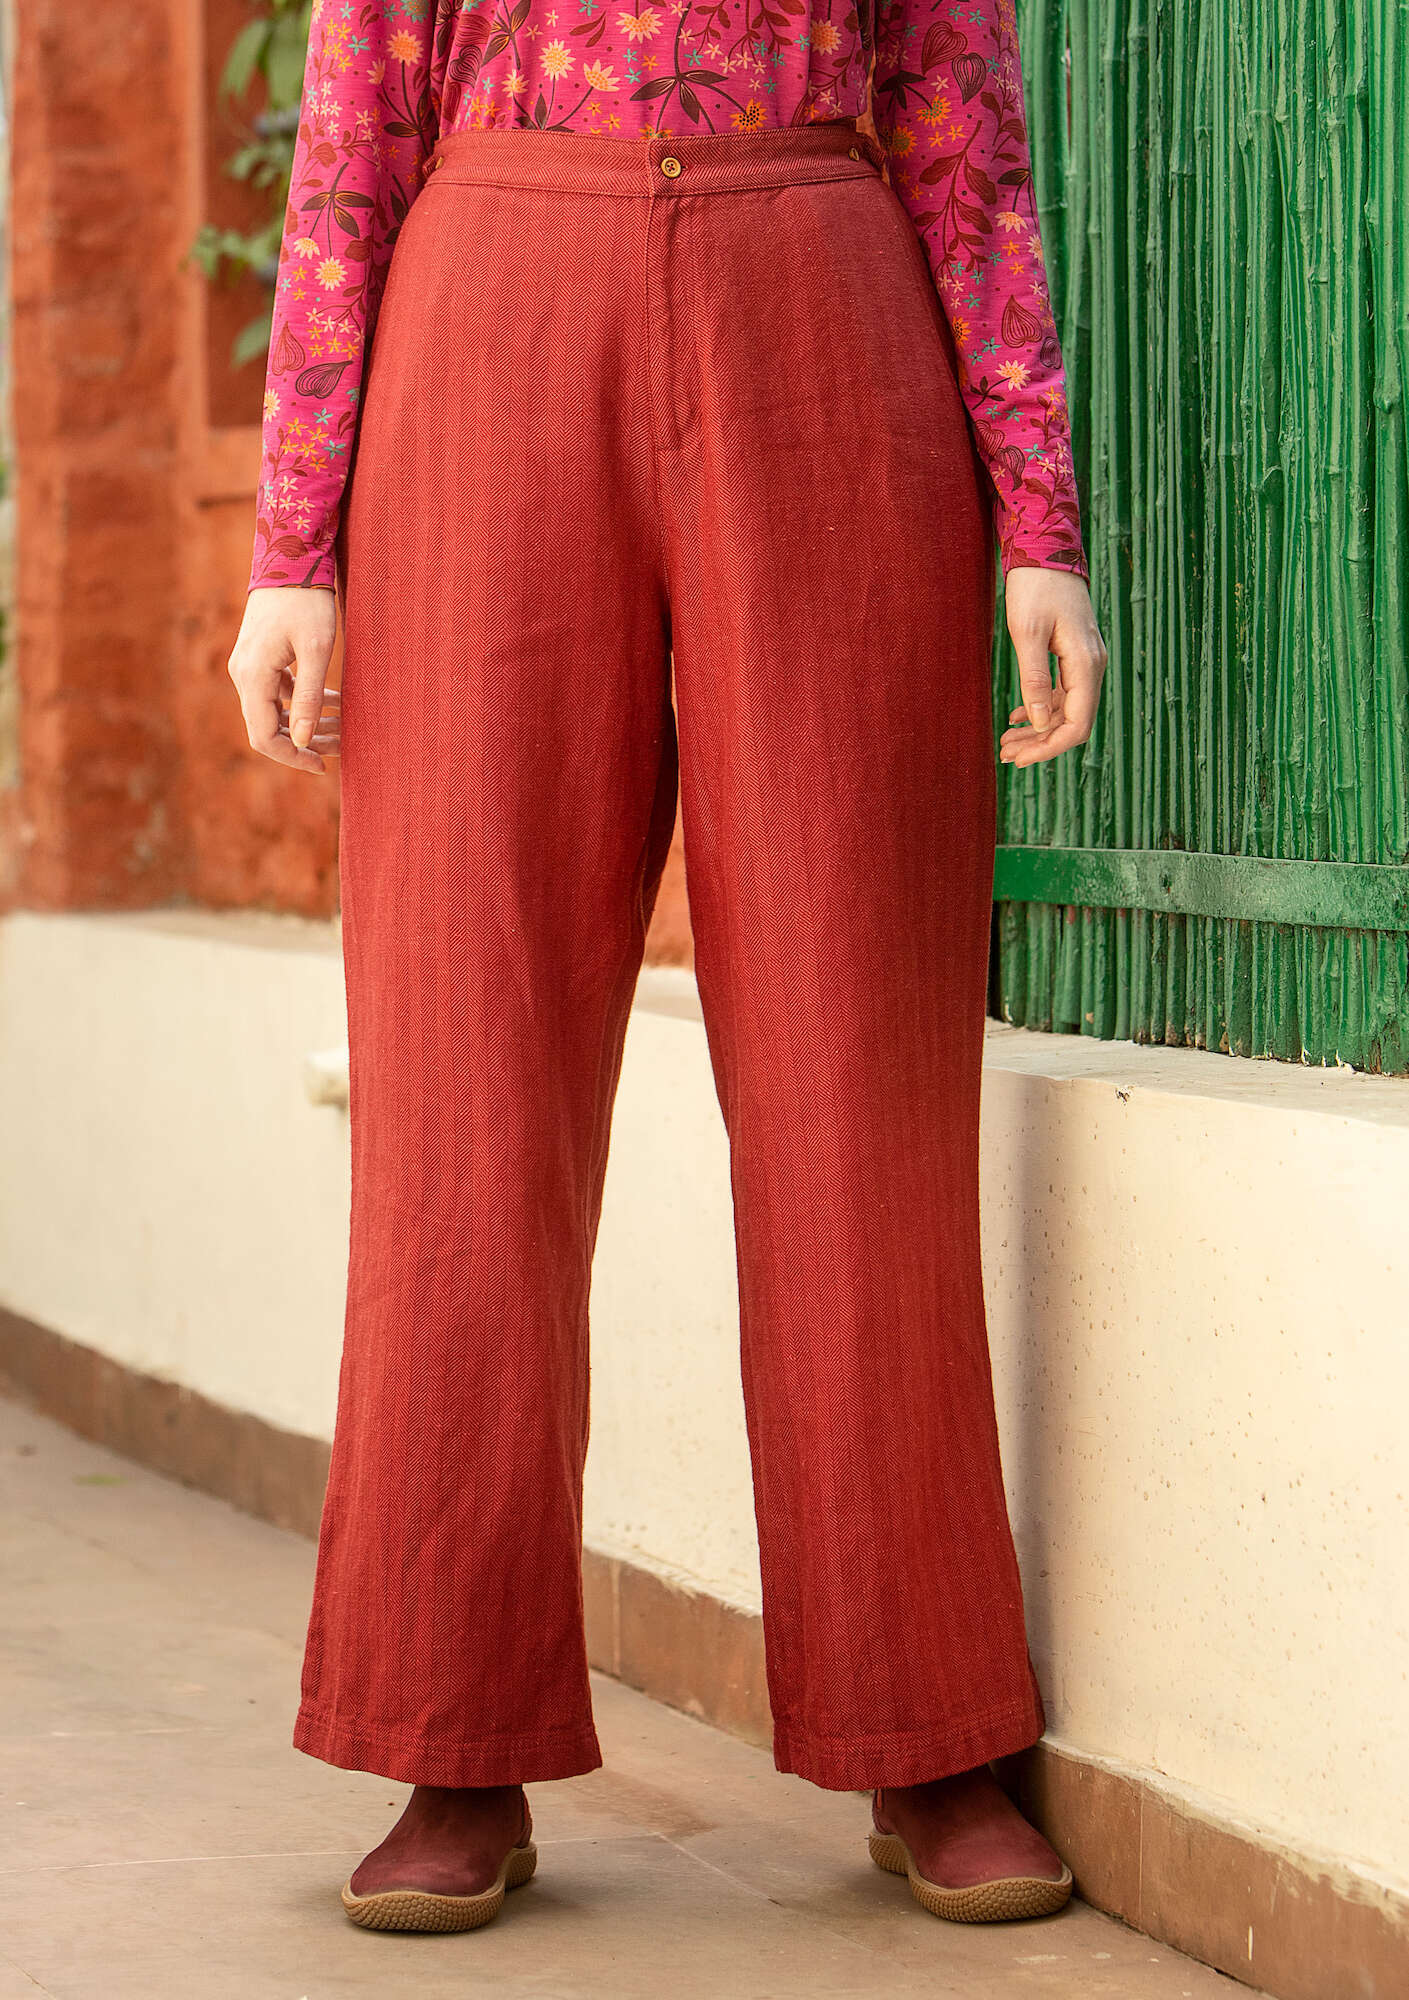 “Woodland” woven organic cotton/linen trousers agate red